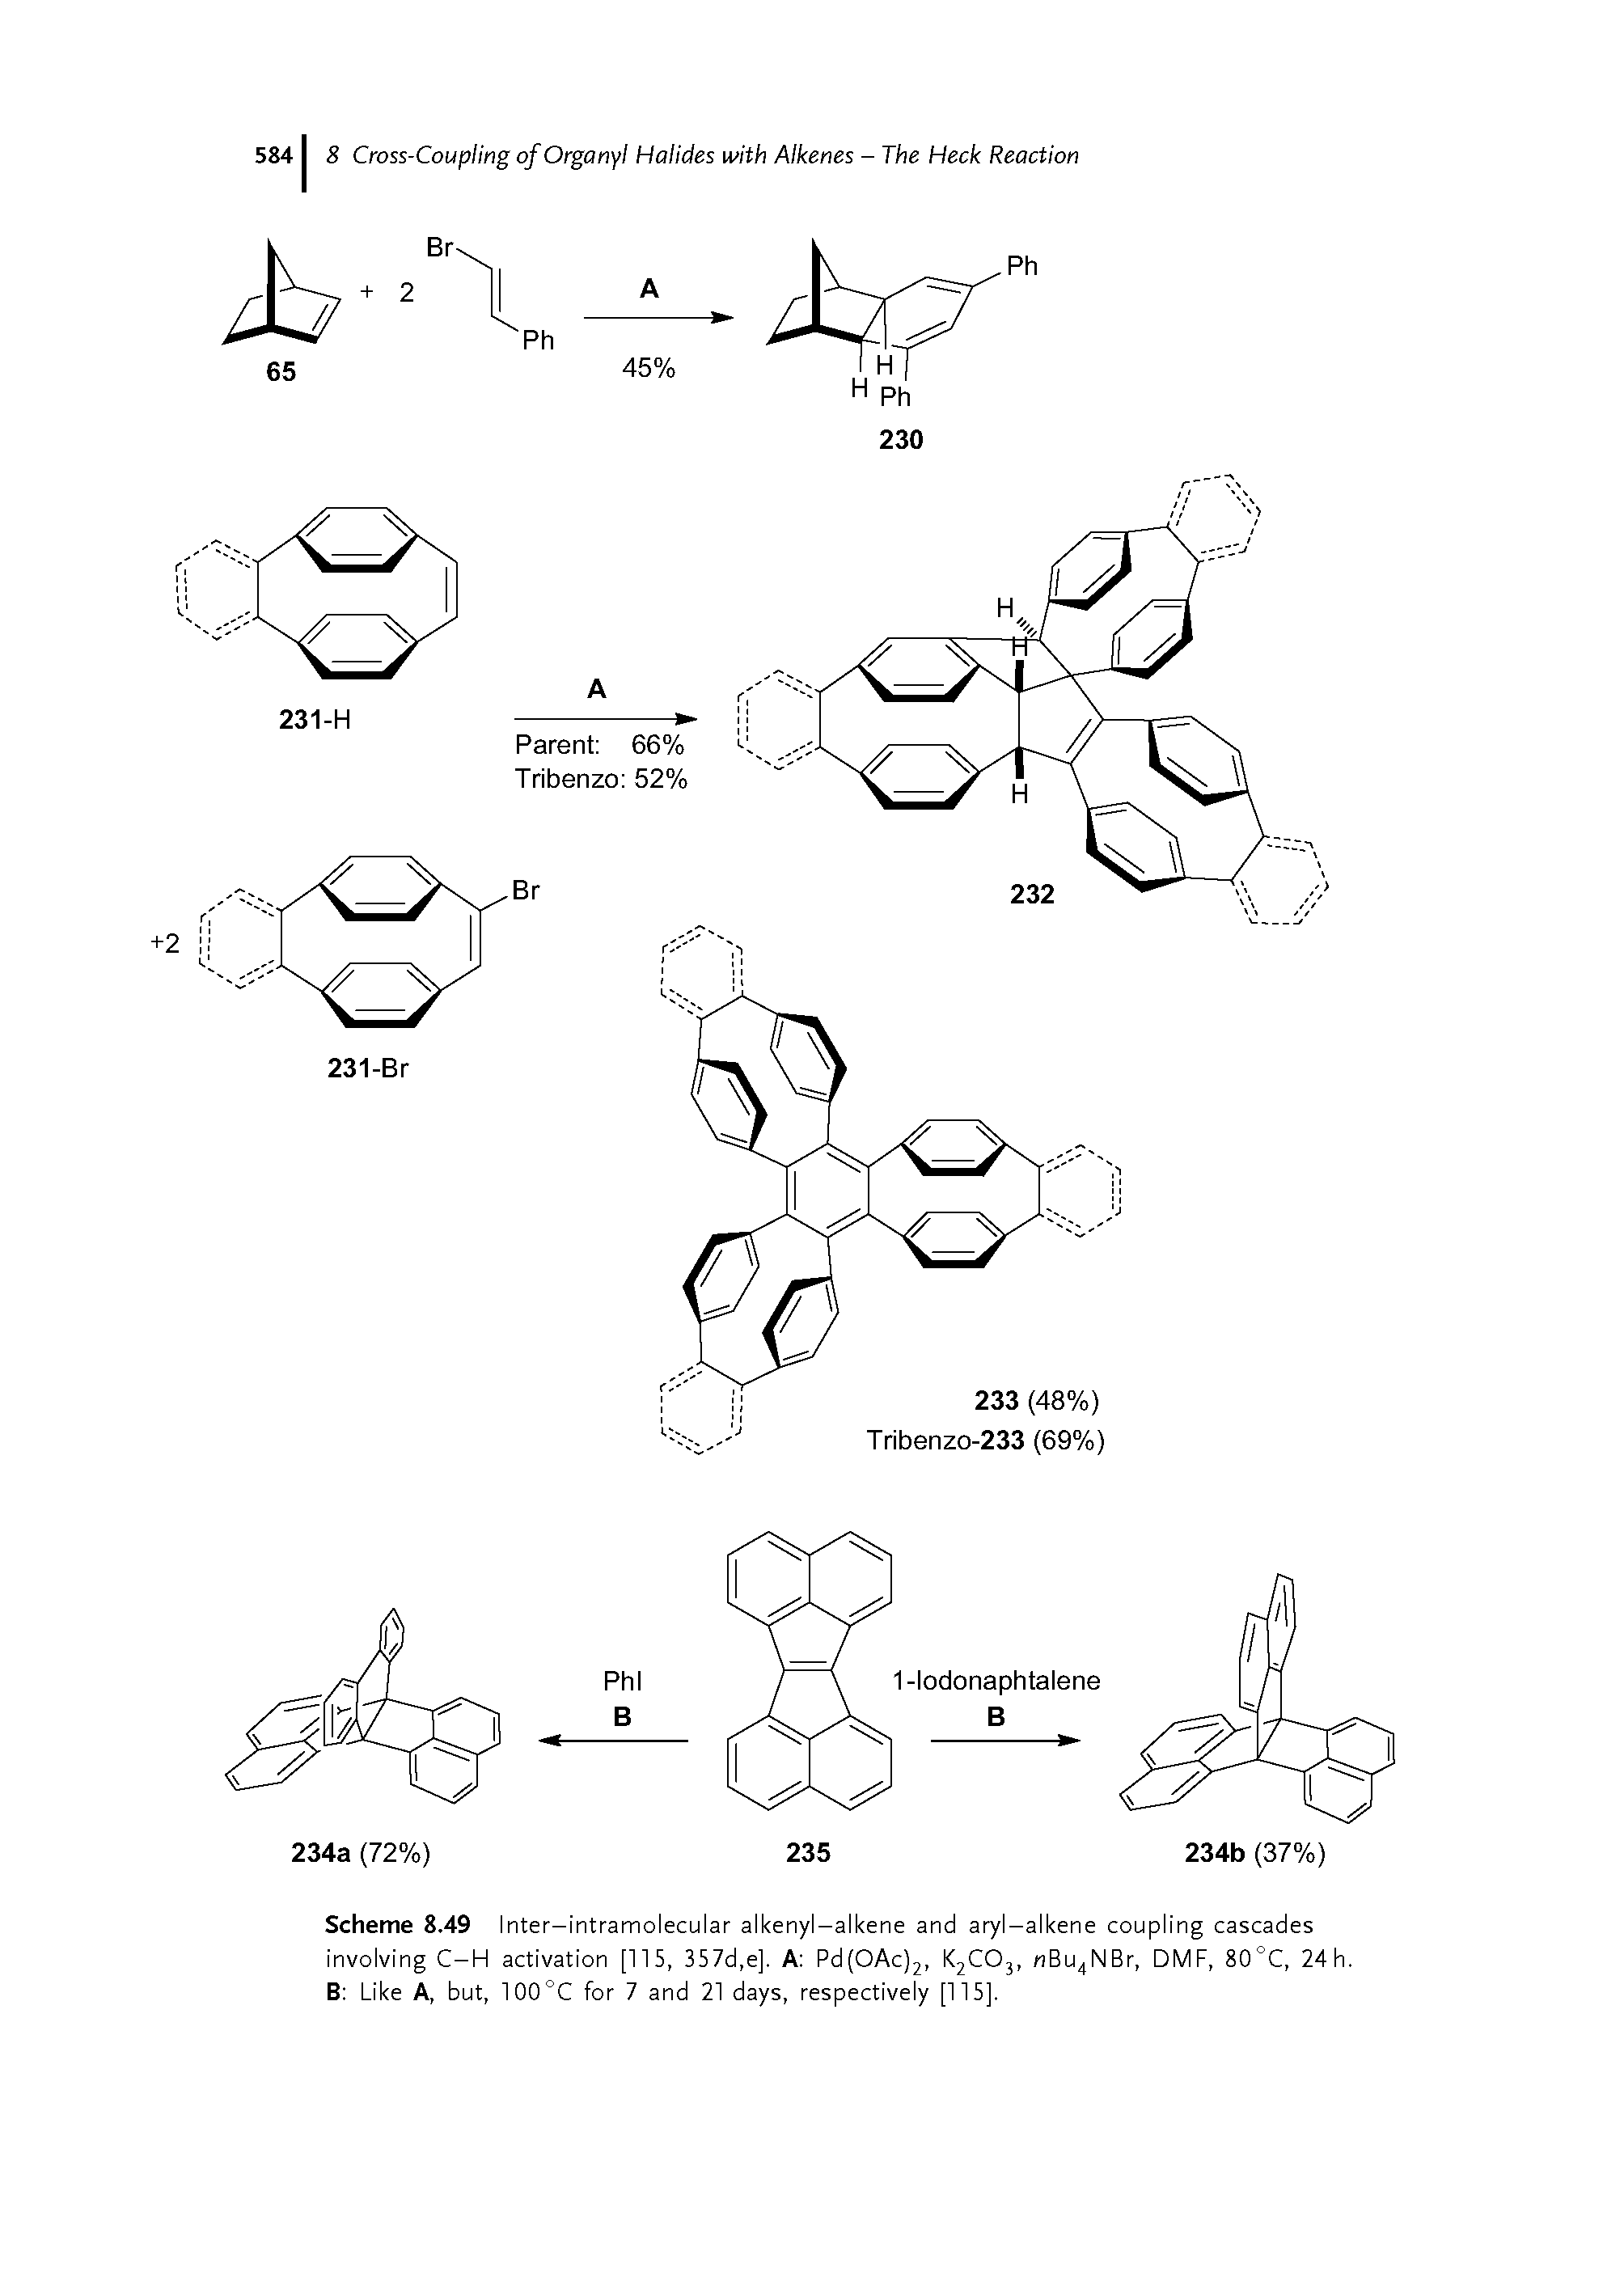 Scheme 8.49 Inter-intramolecular alkenyl-alkene and aryl-alkene coupling cascades involving C-H activation [1 1 5, 357d,e], A Pd(OAc)j, KjCOj, riBu NBr, DMF, 80°C, 24h. B Like A, but, 100°C for 7 and 21 days, respectively [115],...